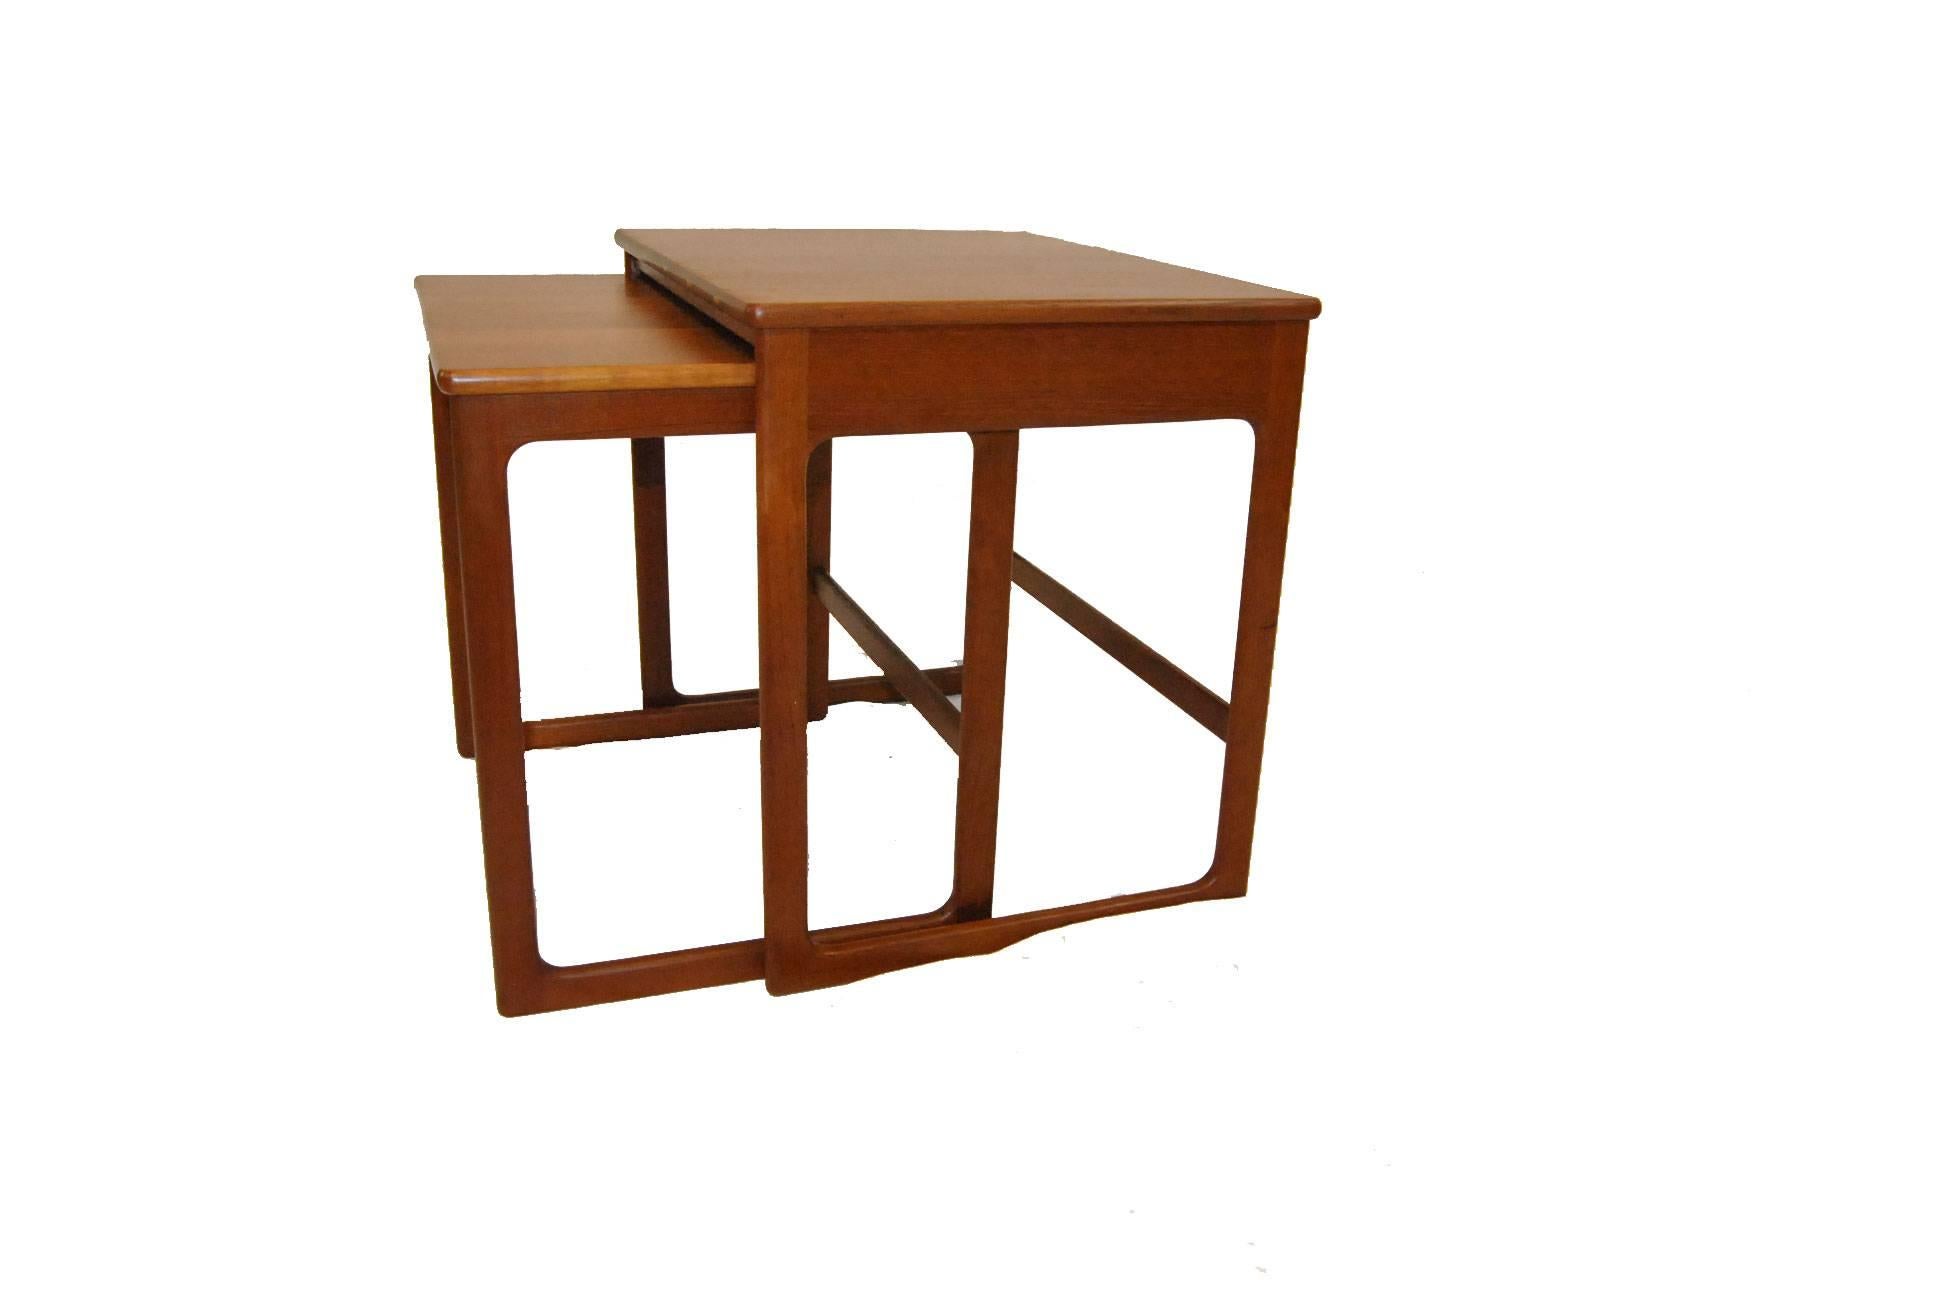 A vintage set of Mid-Century Modern teak nesting tables by A.B. Seffle Møbelfabrik designed by Yngvar Sandstrom. Made in Sweden. Signed on the bottom. Compact, solid, sturdy, beautiful and useful, perfect for your Mid-Century decor. Very good